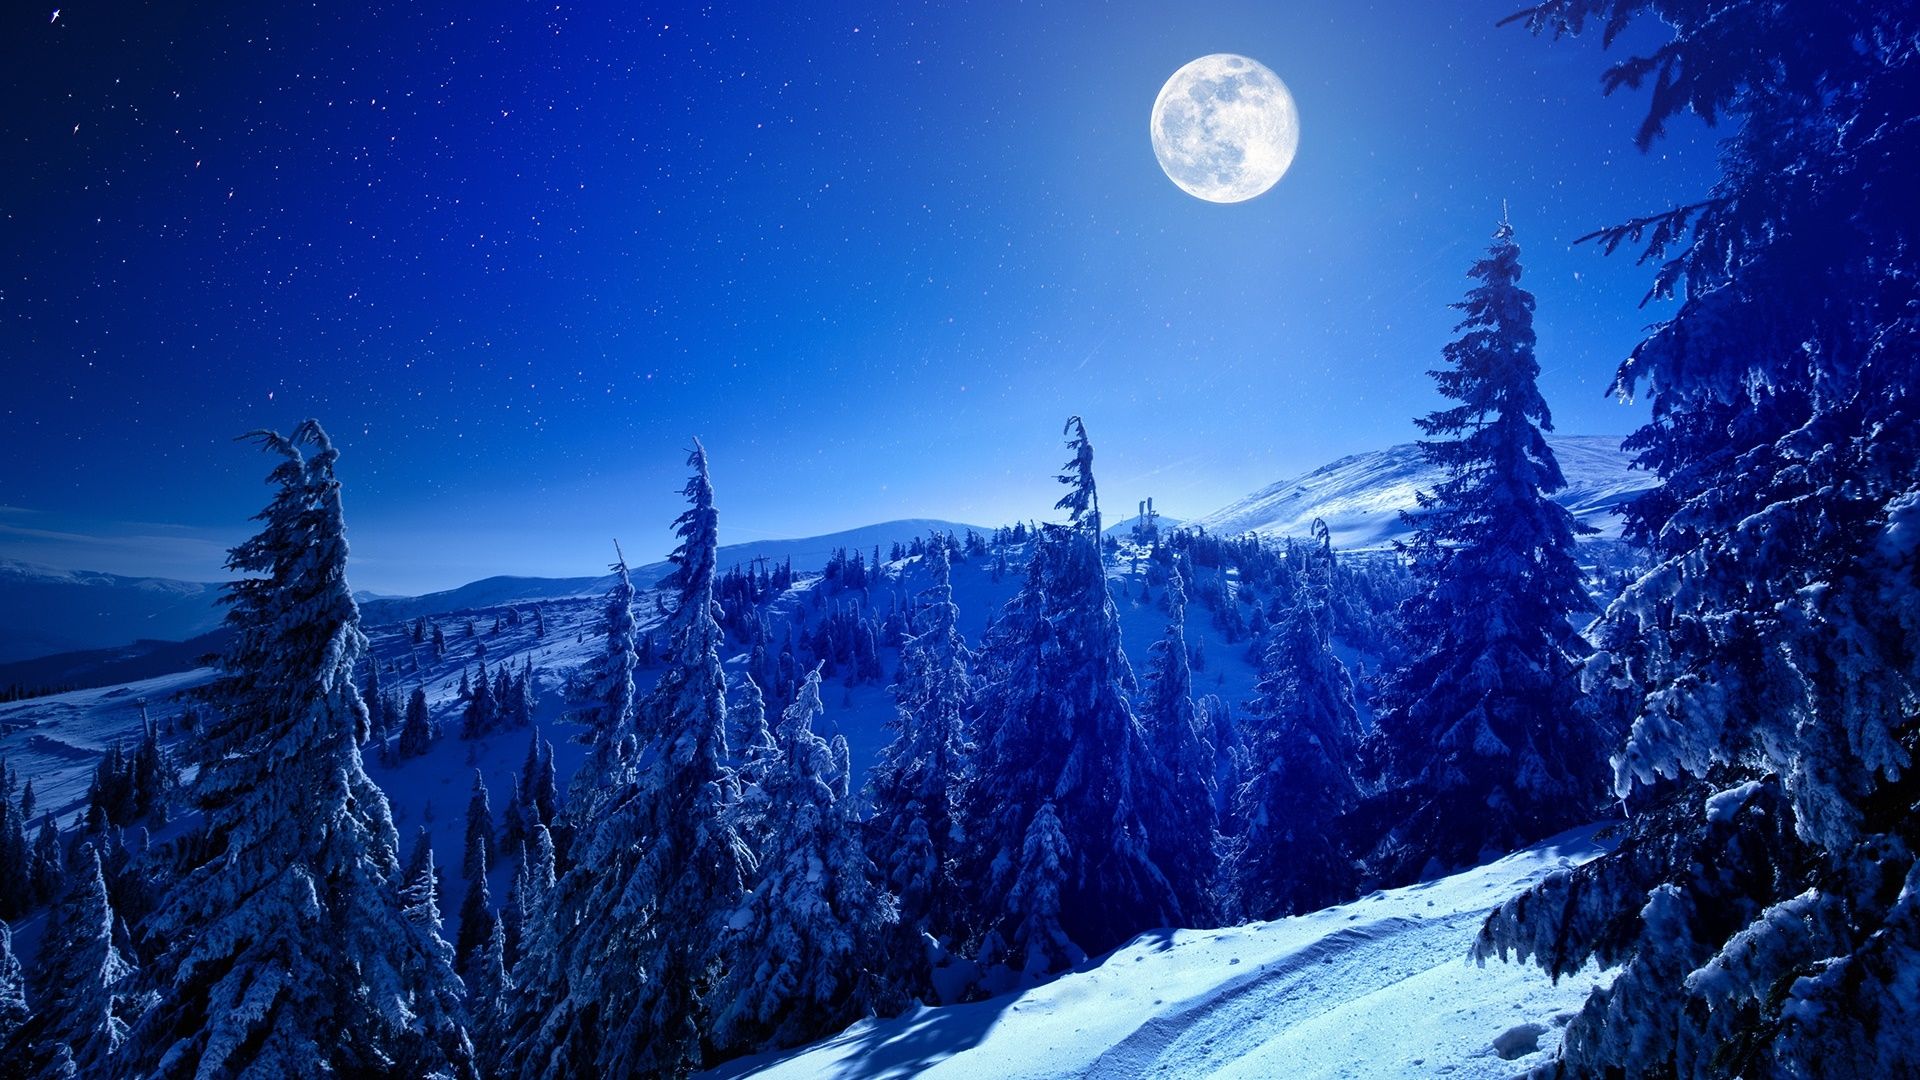 Full Moon Over Winter Forest 1366x768 Resolution Wallpaper, HD Nature 4K Wallpaper, Image, Photo and Background